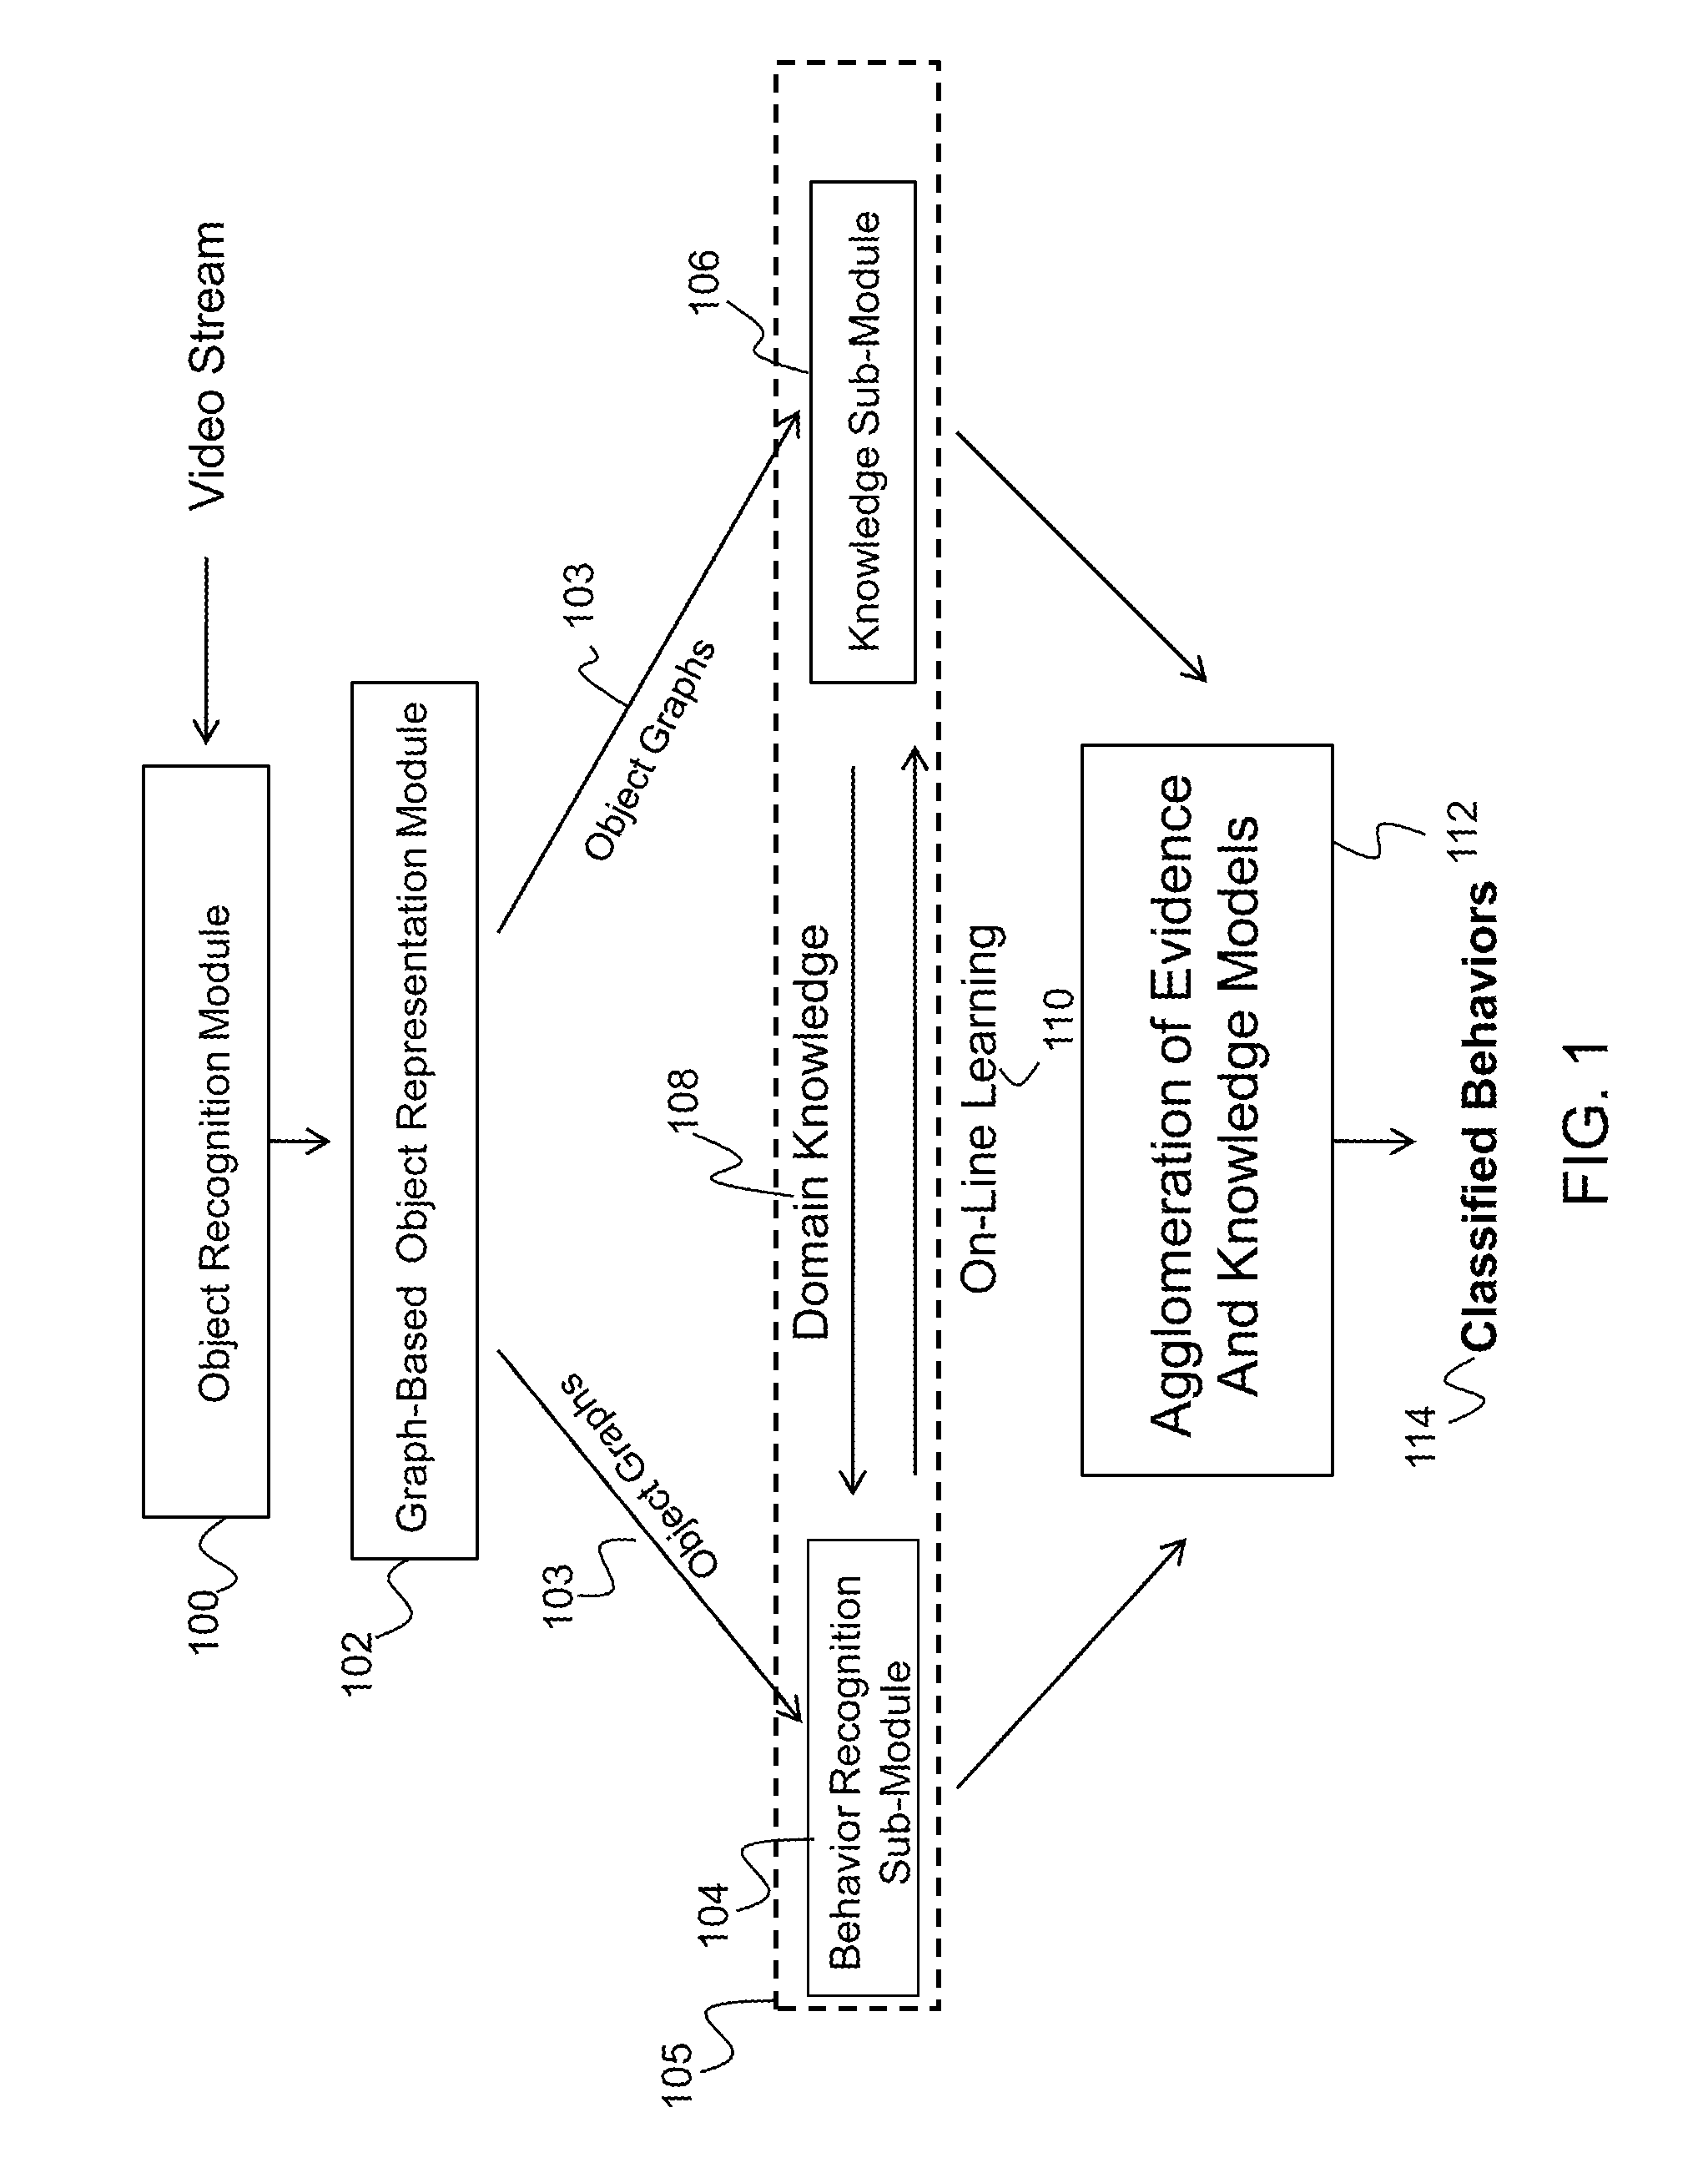 Method for online learning and recognition of visual behaviors